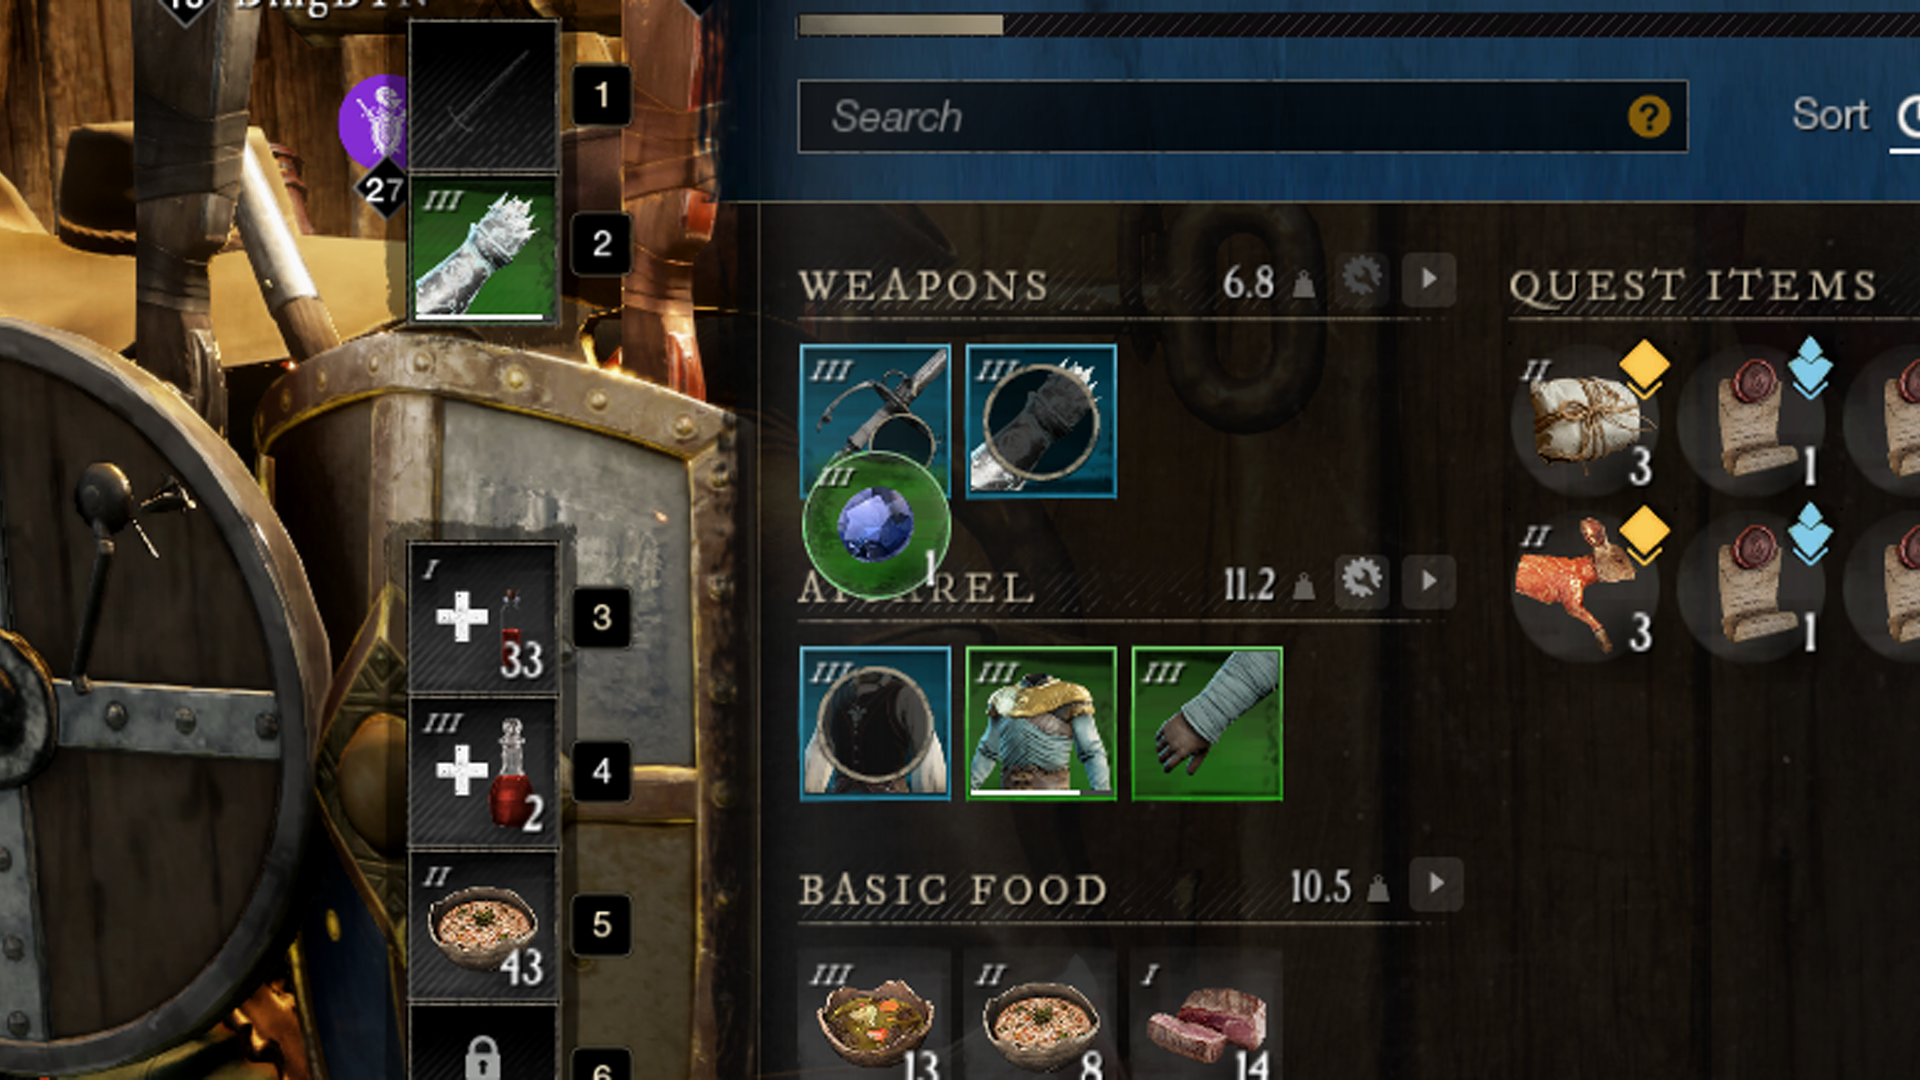 New World gem is not compatible with that item